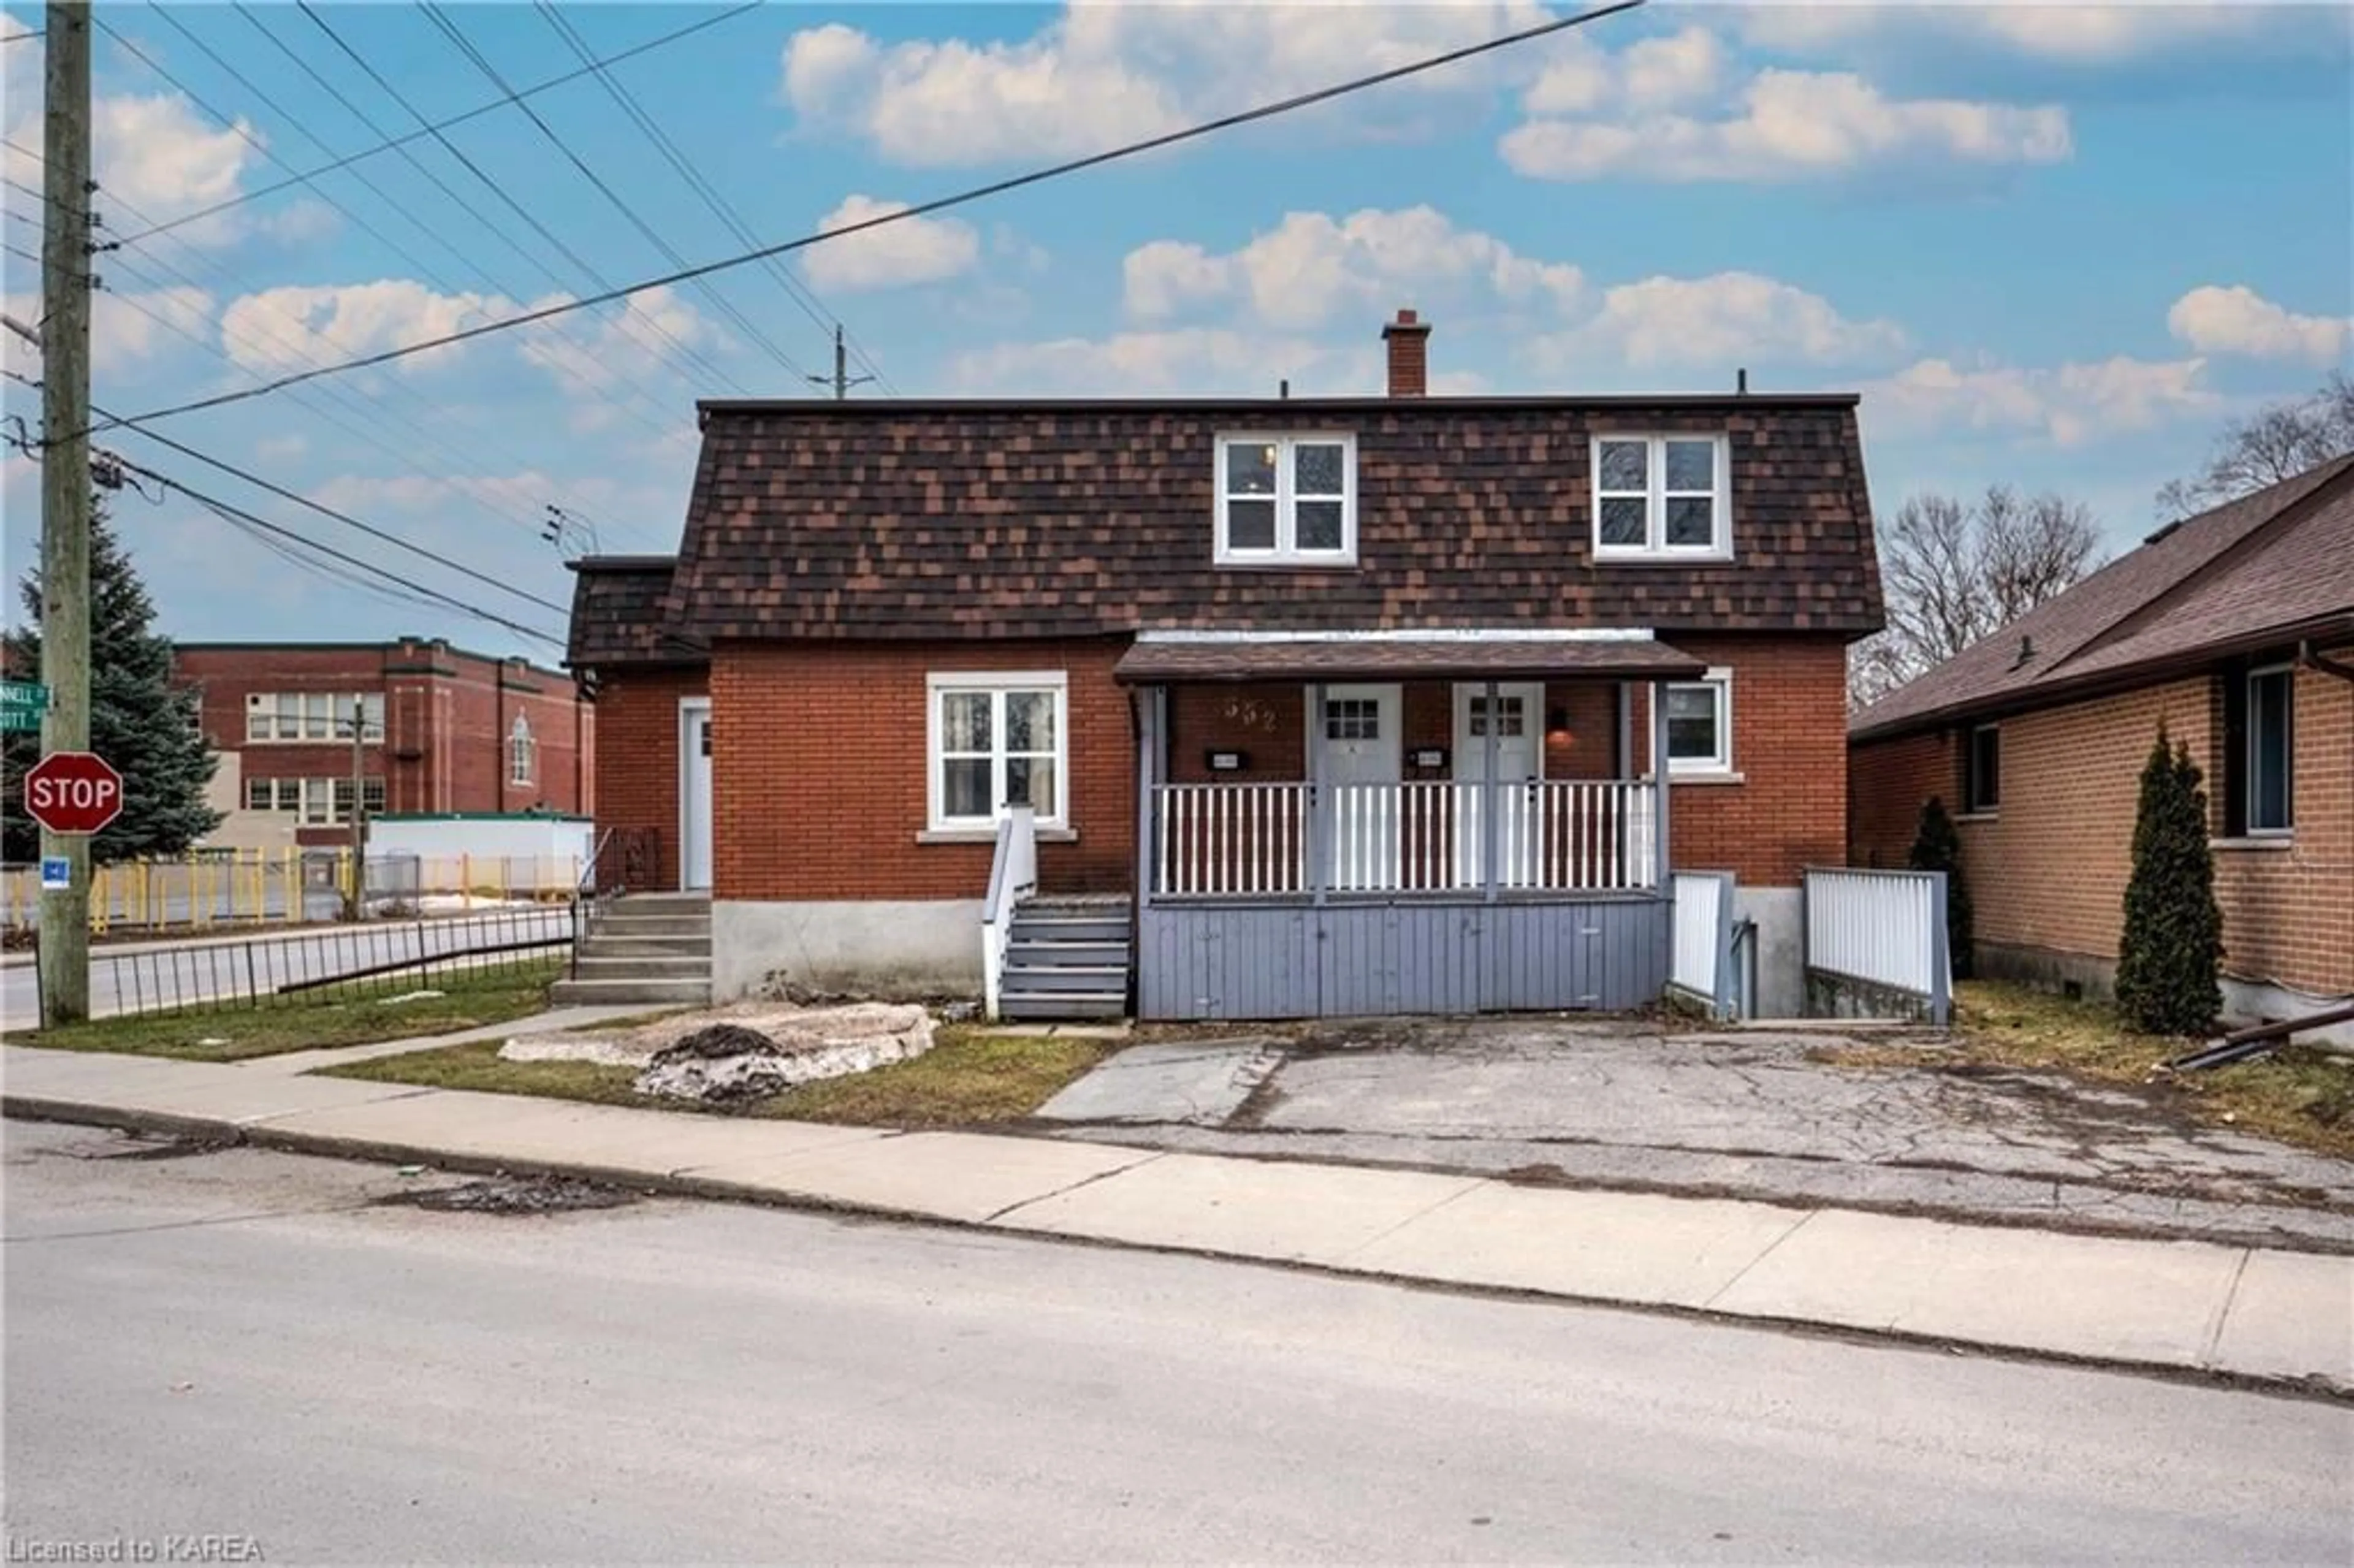 Frontside or backside of a home for 352 Macdonnell St, Kingston Ontario K7L 4C7